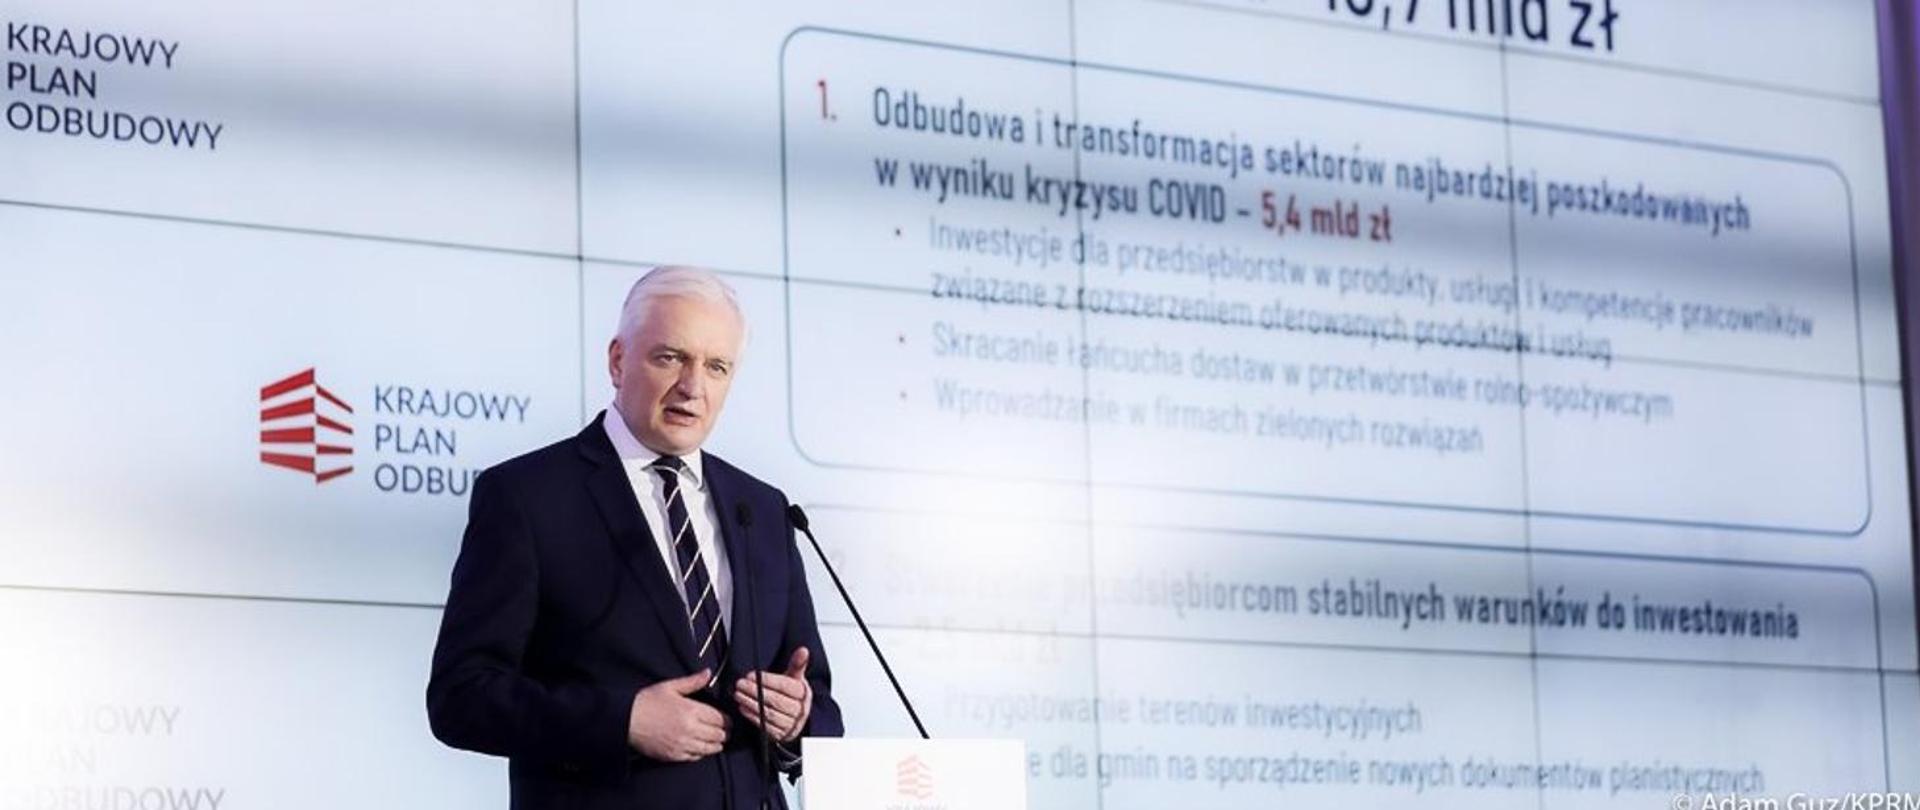 Jarosław Gowin behind the lectern. Behind him, the logo of the National Reconstruction Plan displayed on the big screen.